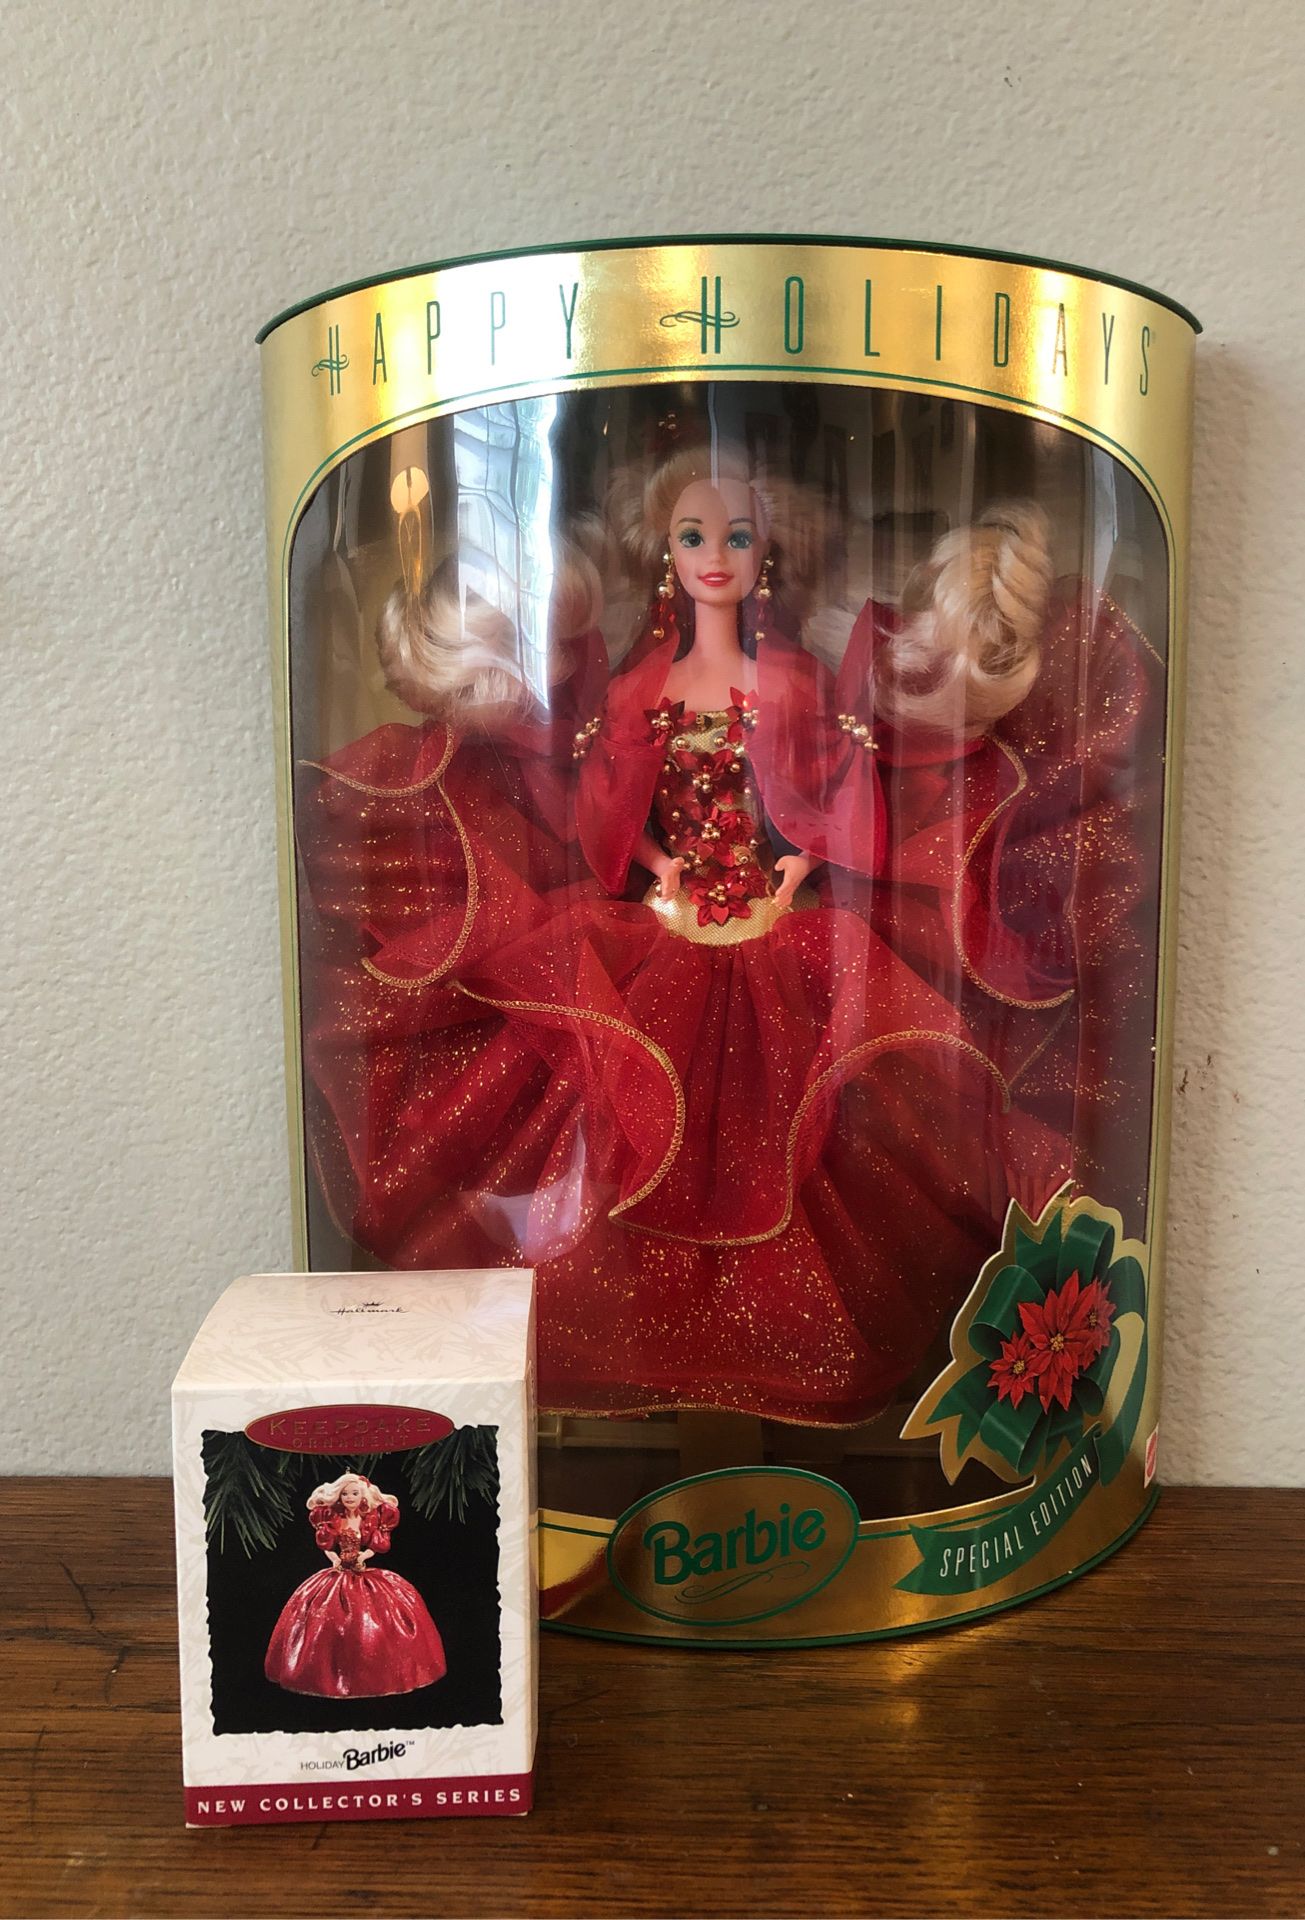 Vintage 1993 HAPPY HOLIDAYS SPECIAL EDITION BARBIE DOLL Mattel Christmas Blonde and hallmark Christmas ornament